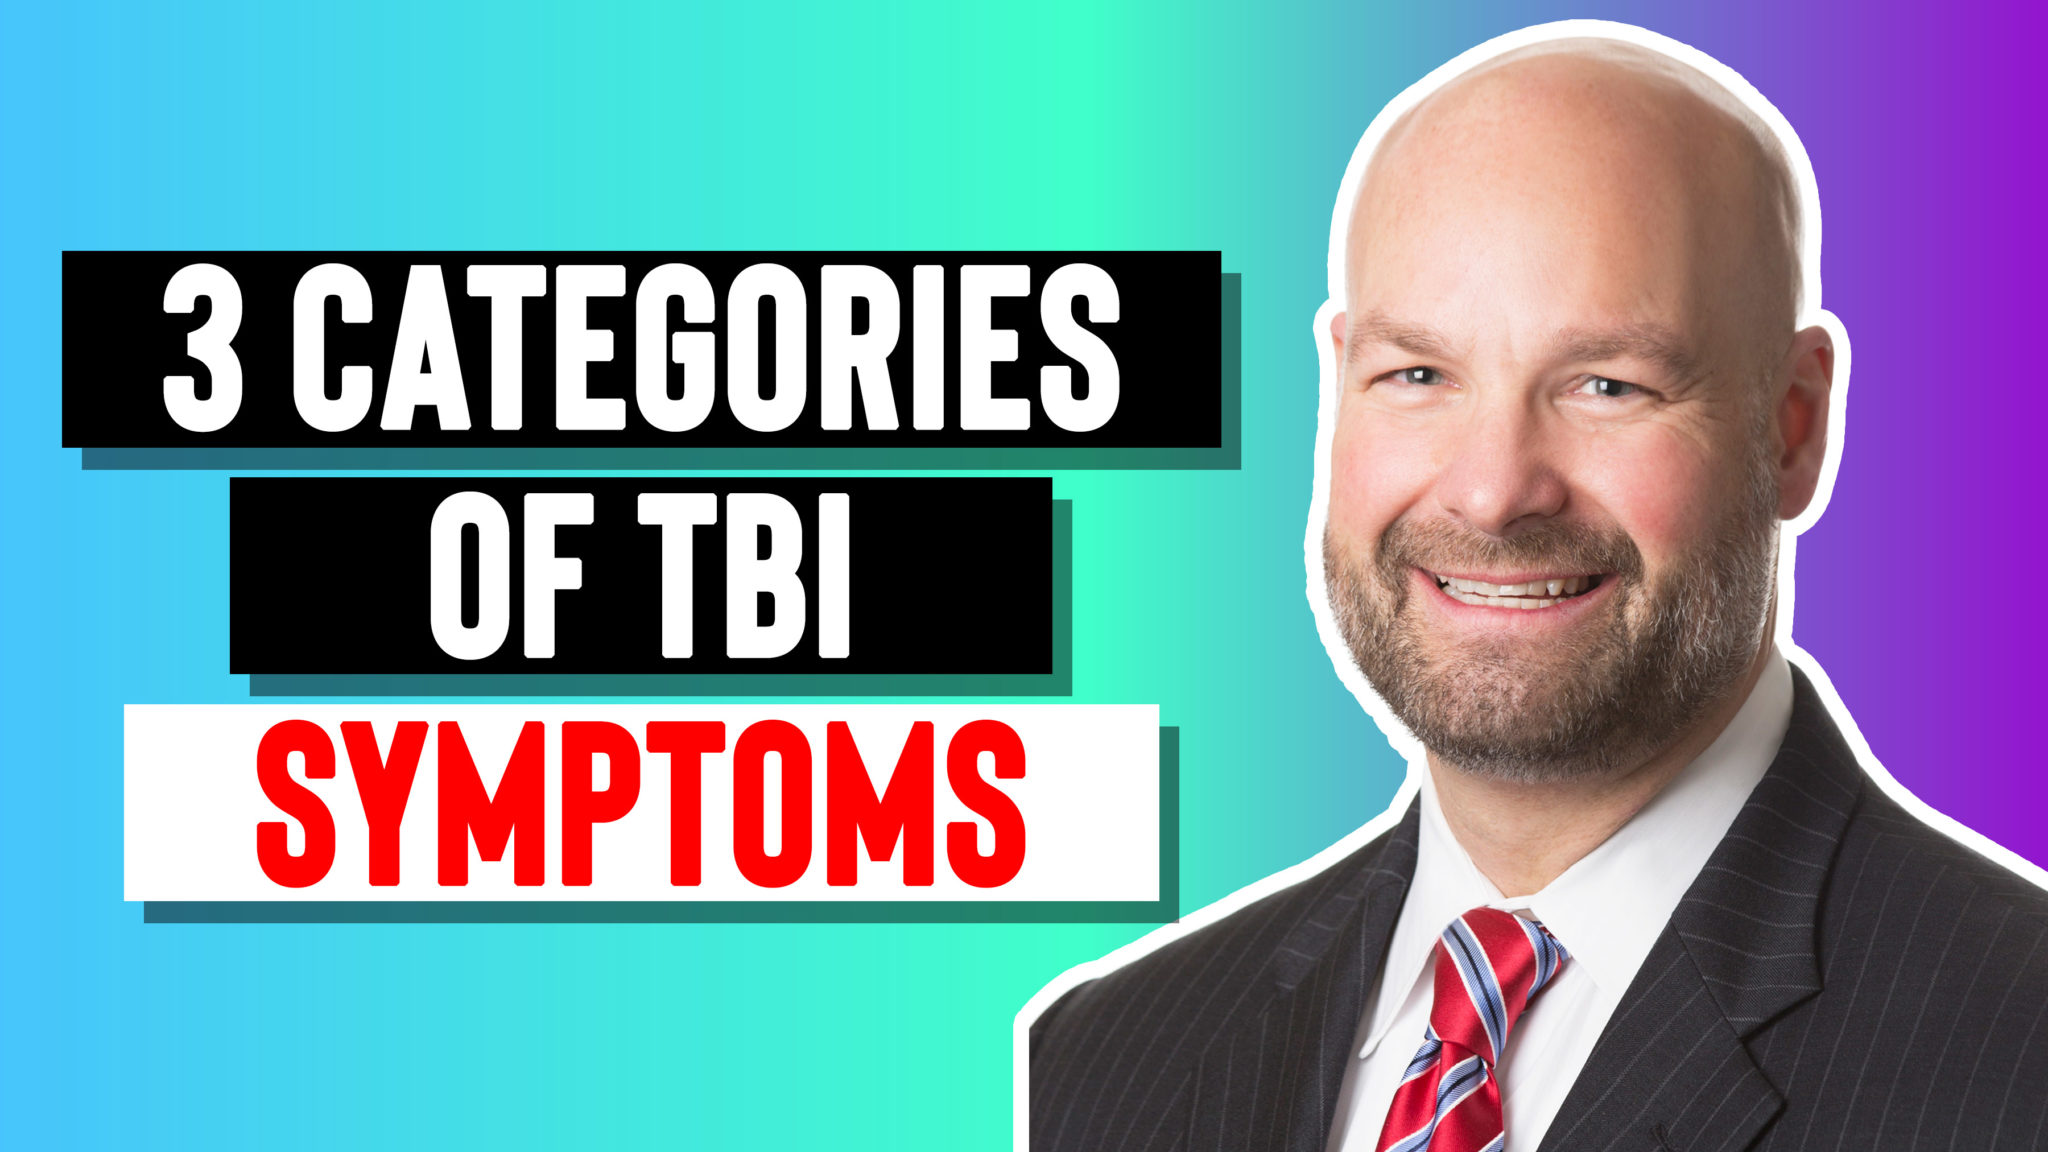 tbi diagnosis years later